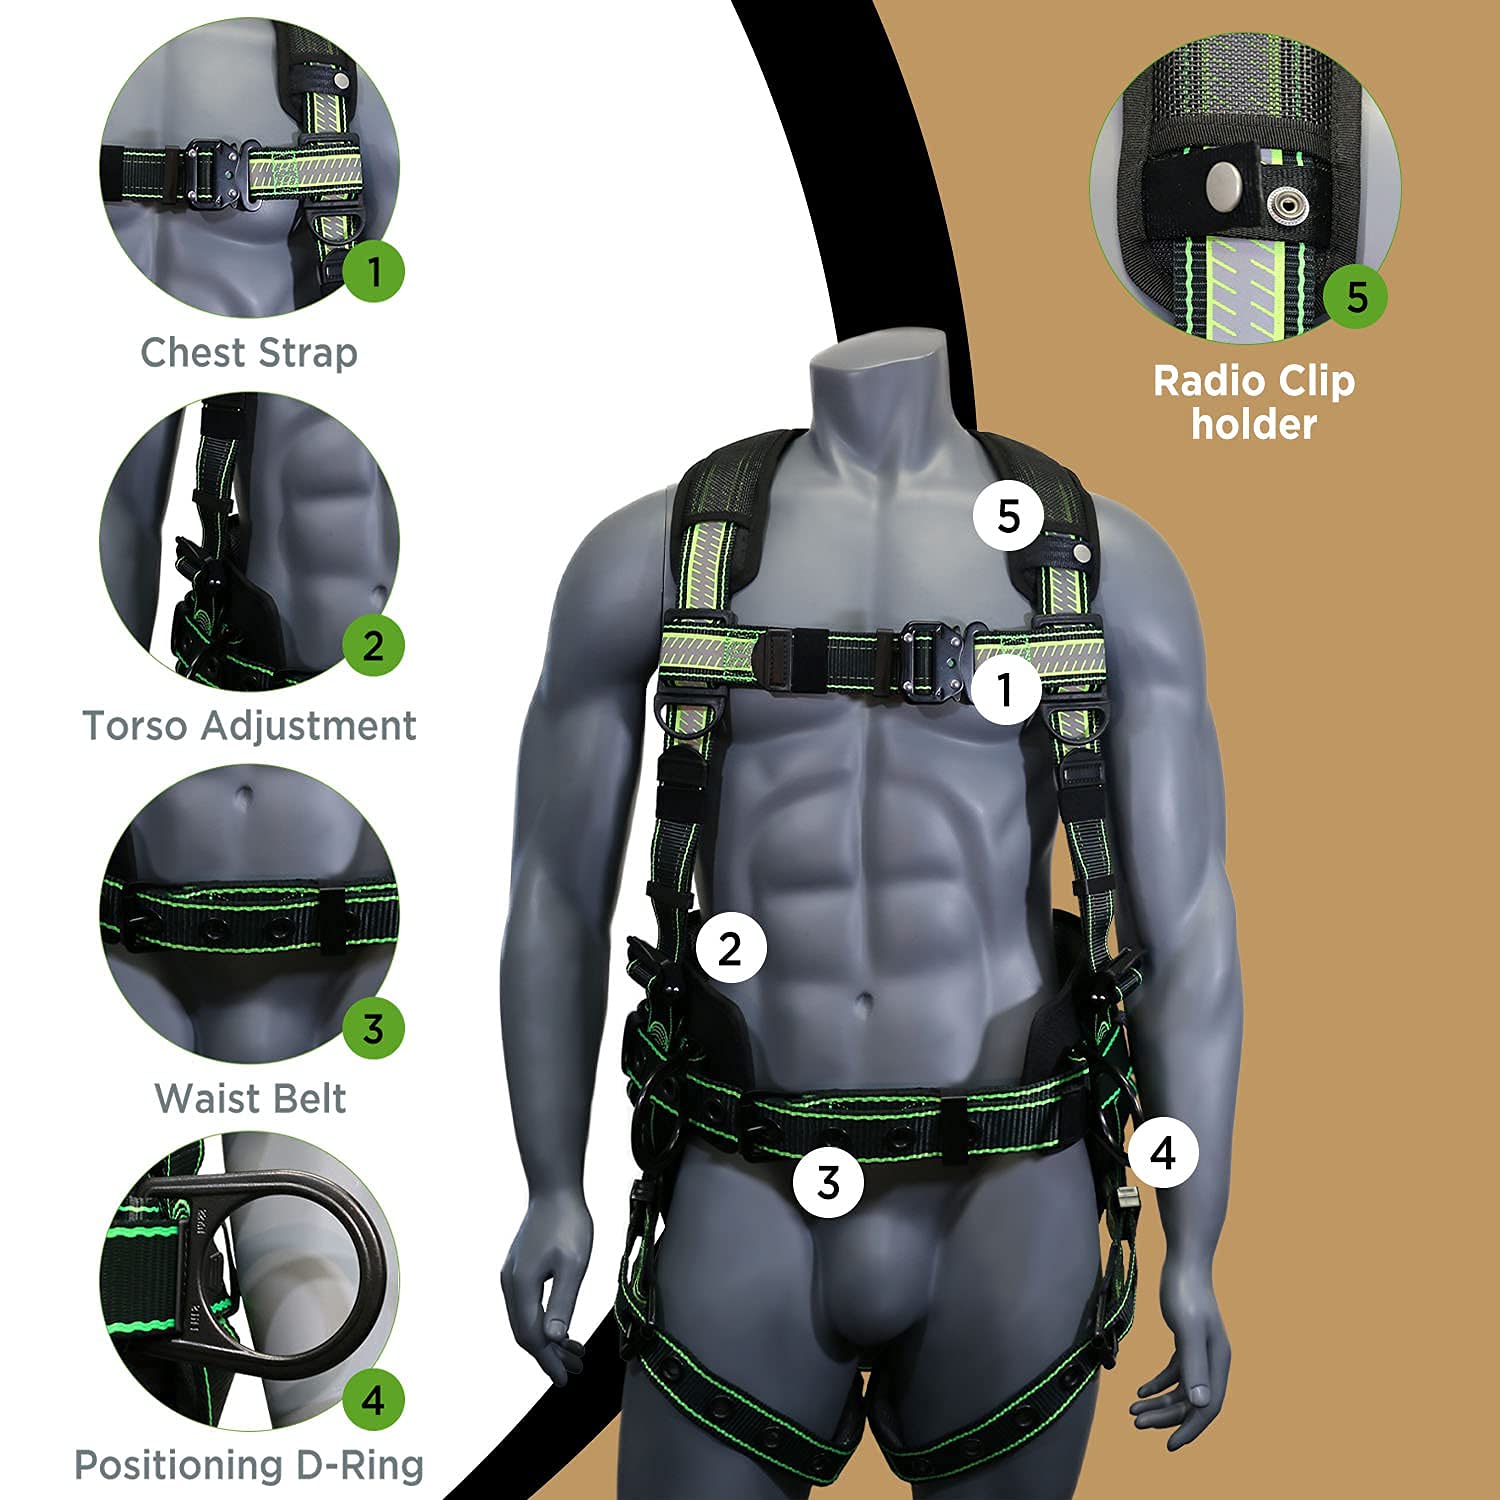 AFP Fall Protection Premium Hi-Viz Lime & Black Reflective Safety Harness, Vented & Padded Shoulder, Legs & Back, 8” Thick Back Support Belt, 3 D-Rings, Tongue Buckle, Quick Release (OSHA/ANSI PPE)